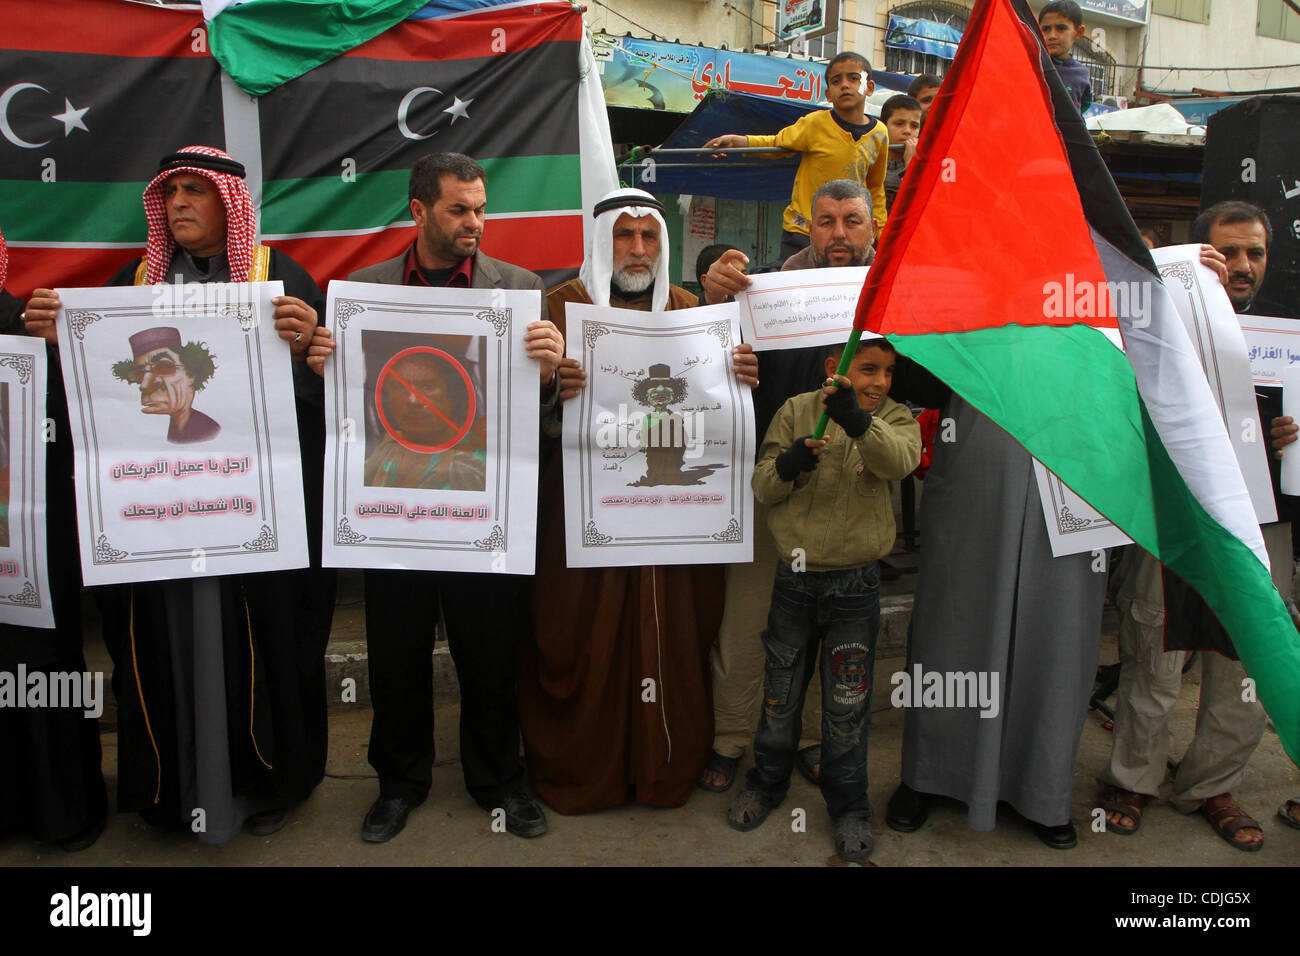 Palestinians take part in a protest to show solidarity with Libyan people, in Gaza city. Photo by Ashraf Amra Stock Photo